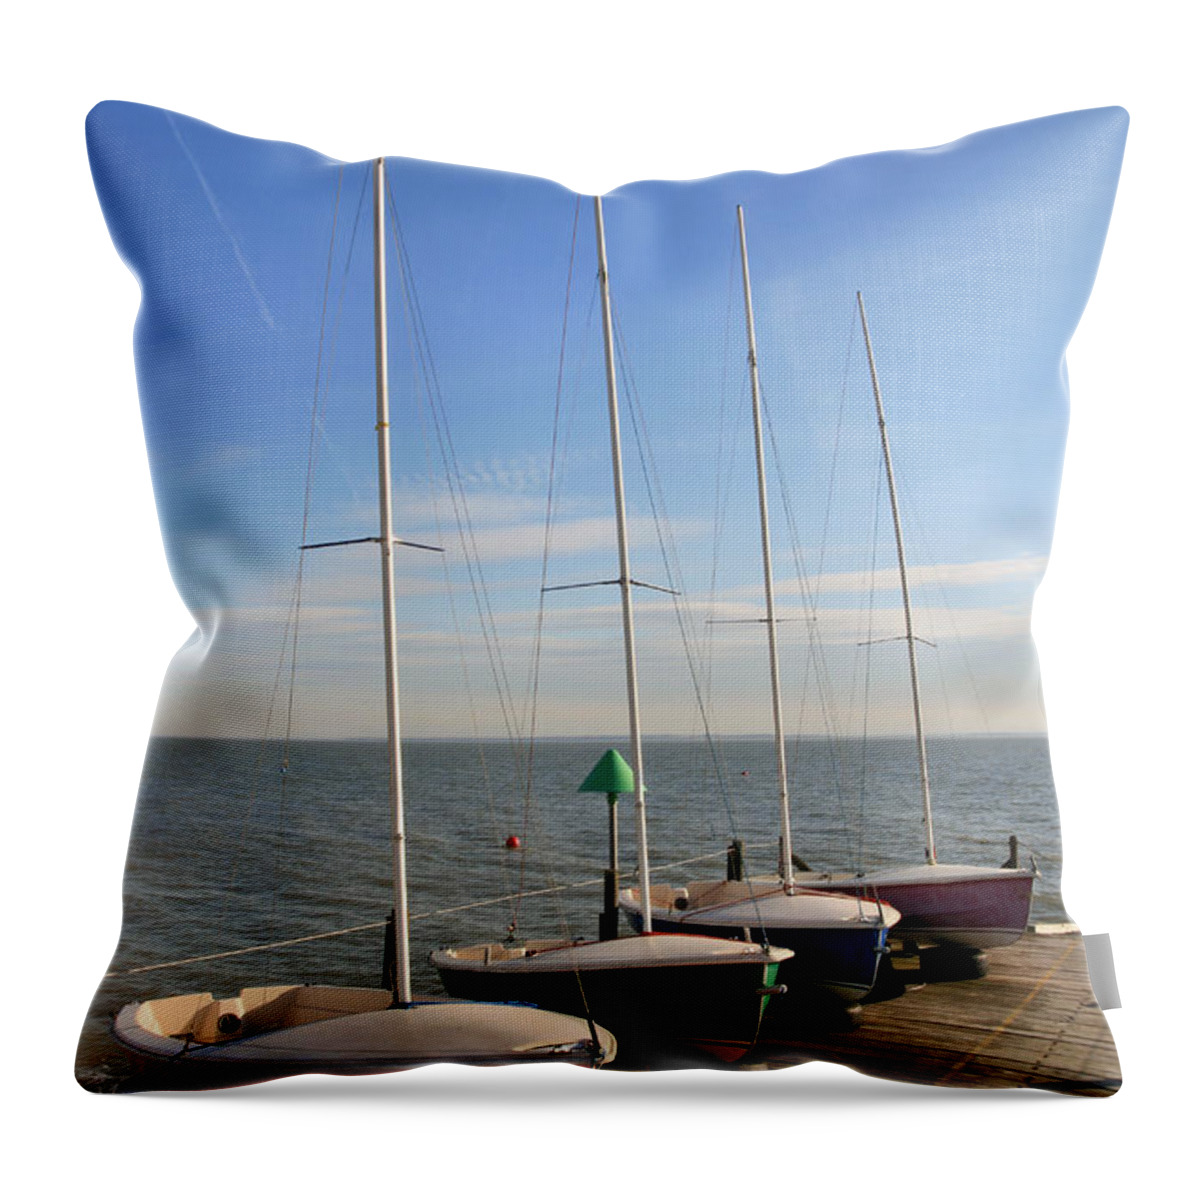 Tranquility Throw Pillow featuring the photograph Boats At Sea by M D Baker